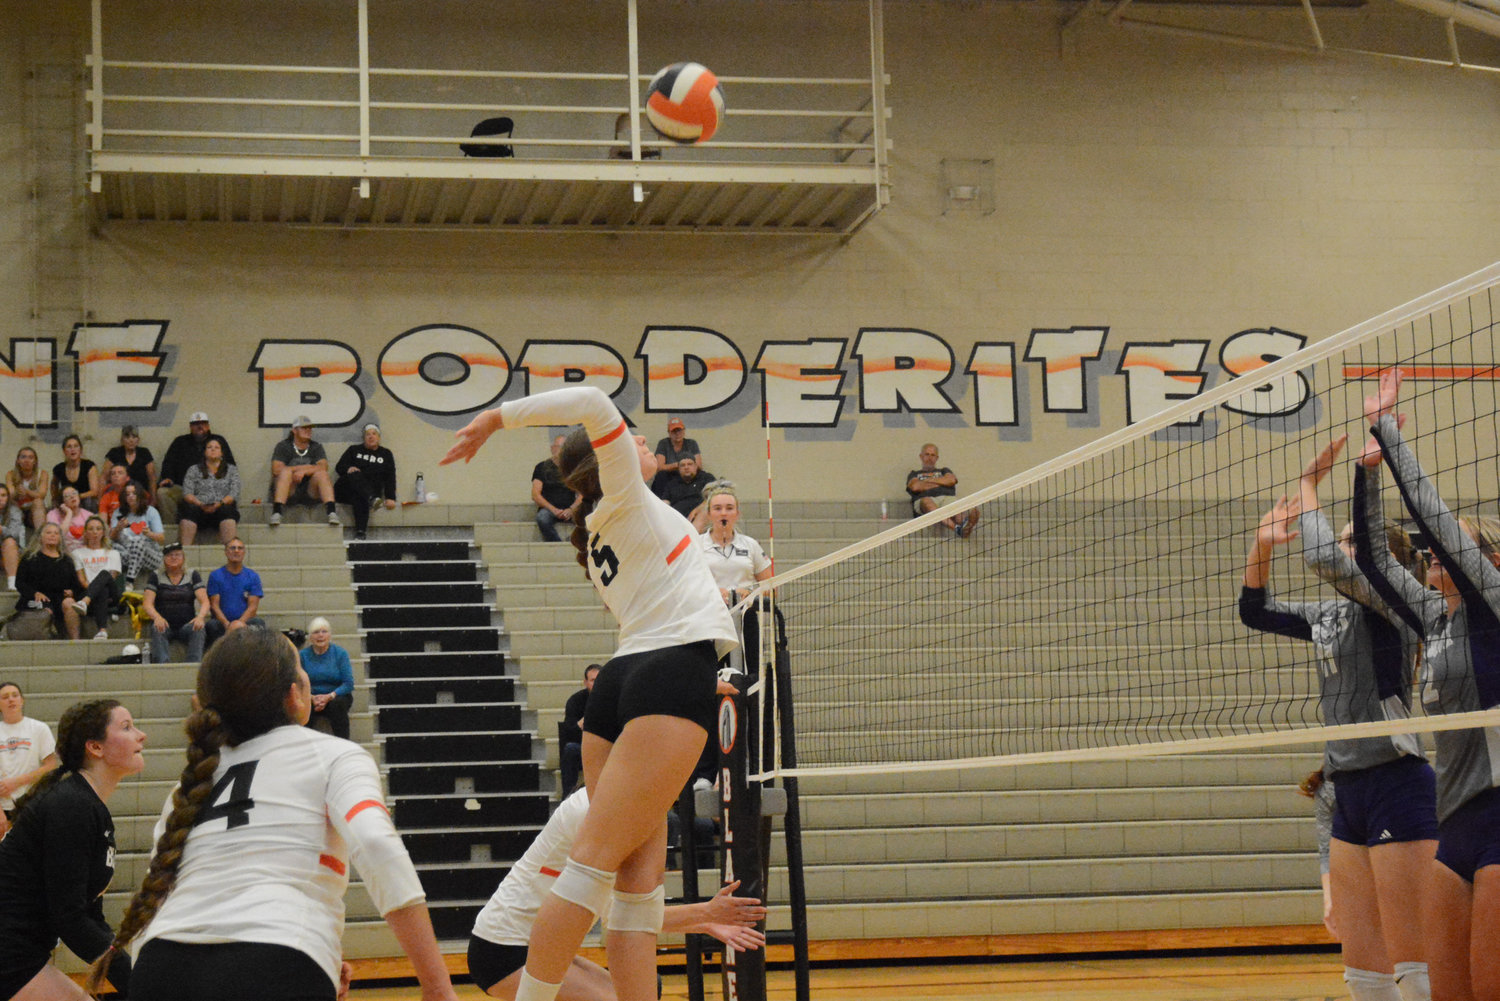 Hope Weeda goes up for a spike in the Lady Borderites' 3-0 loss to Nooksack Valley on September 26.